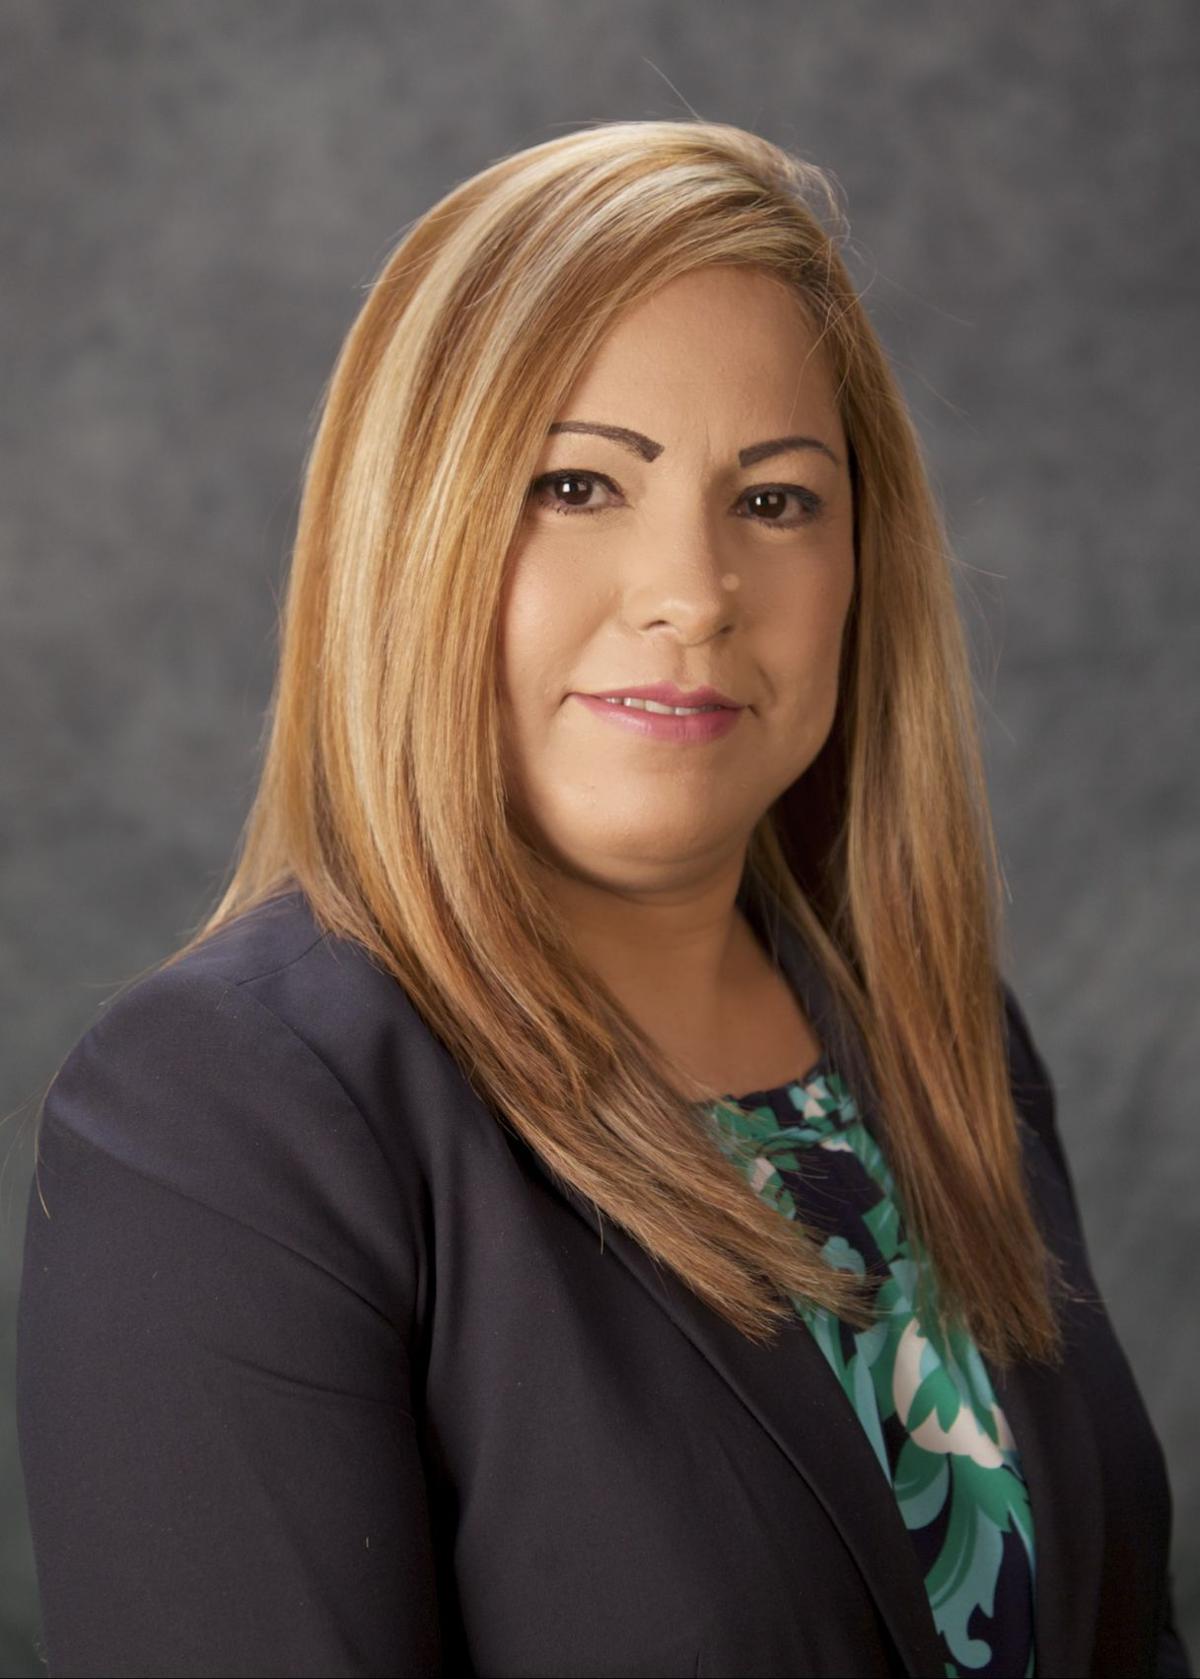 YISD begins school year with 13 new principals | Special Sections ...